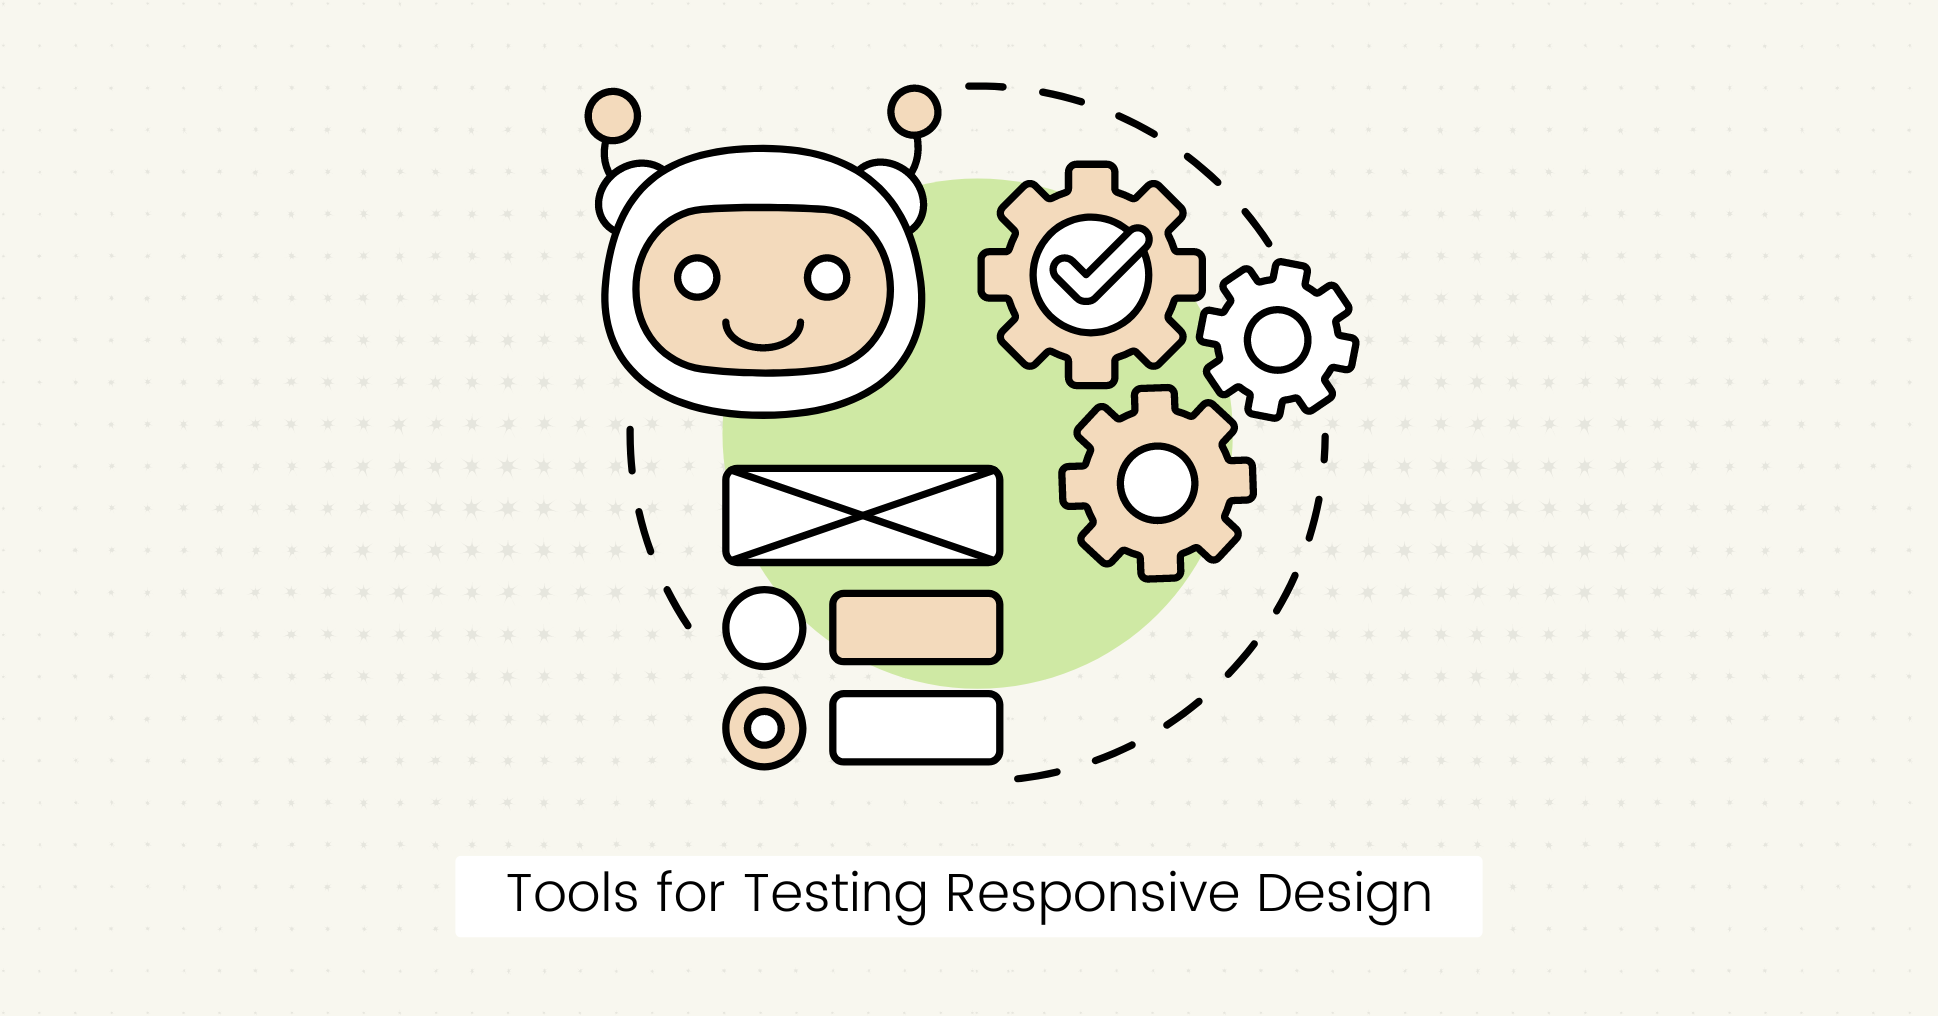 Tools for Testing Responsive Design